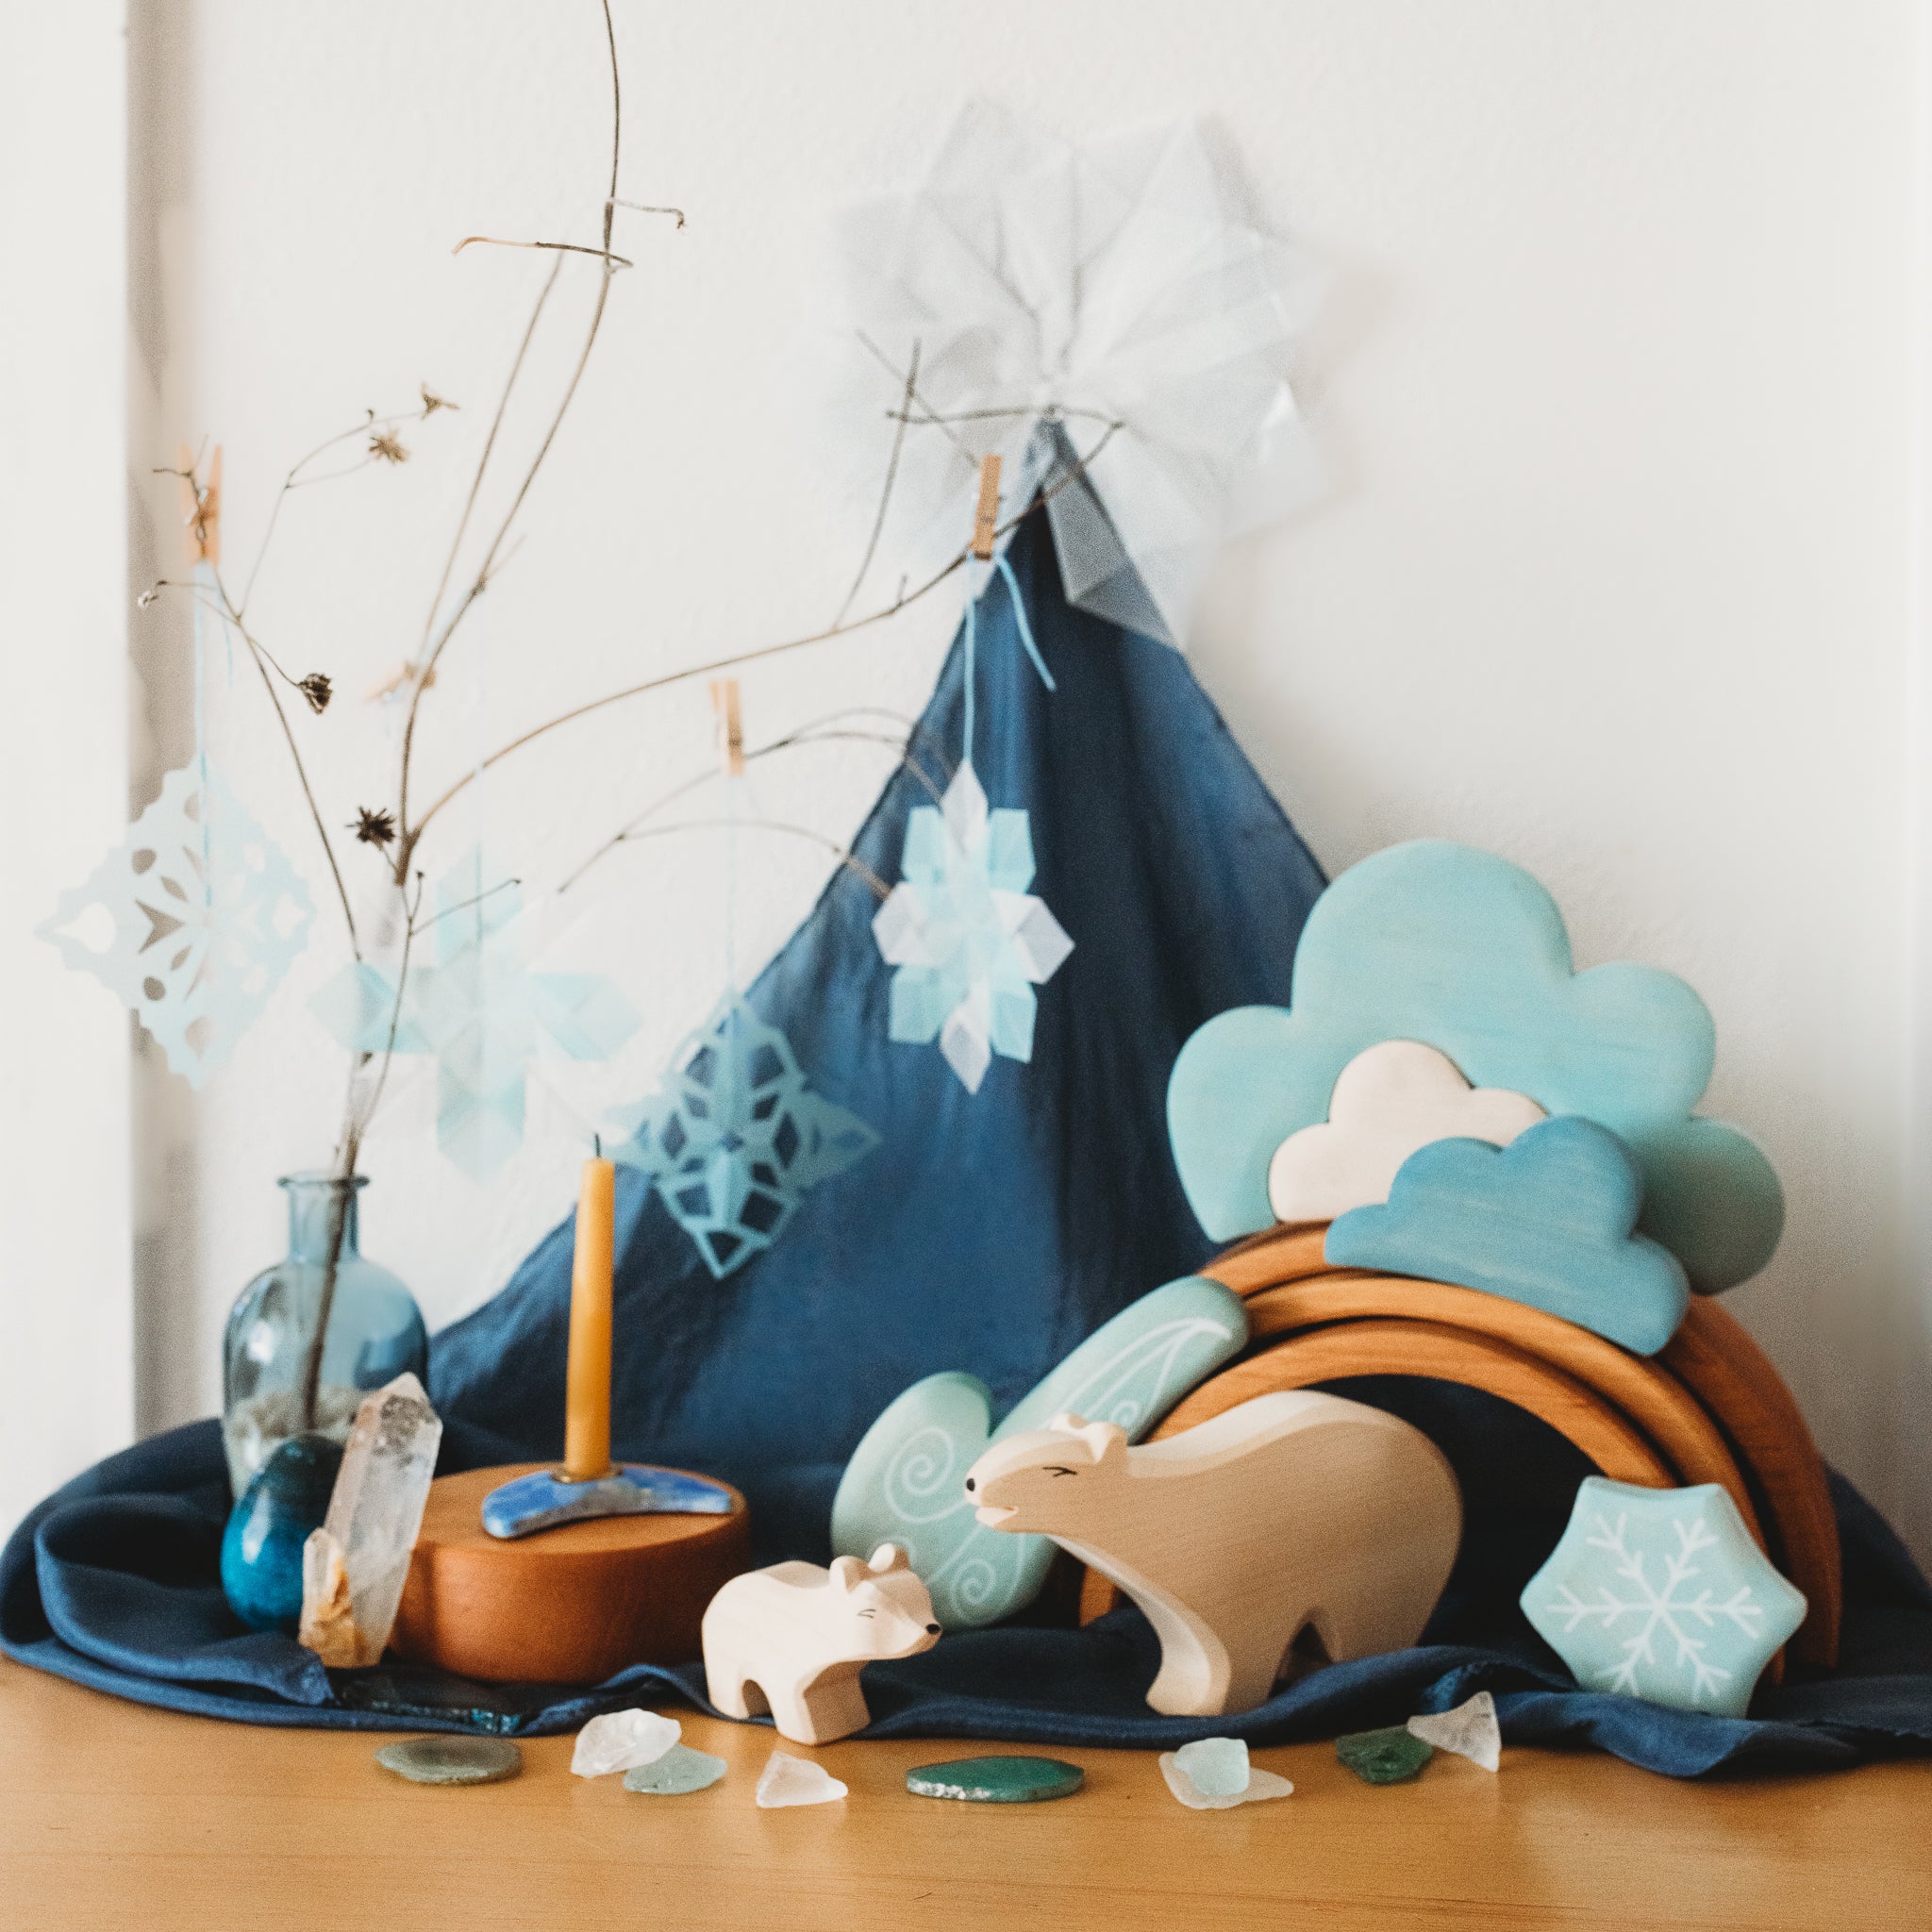 A cozy Waldorf Winter table sits with Ostheimer wooden figures and playsilks.